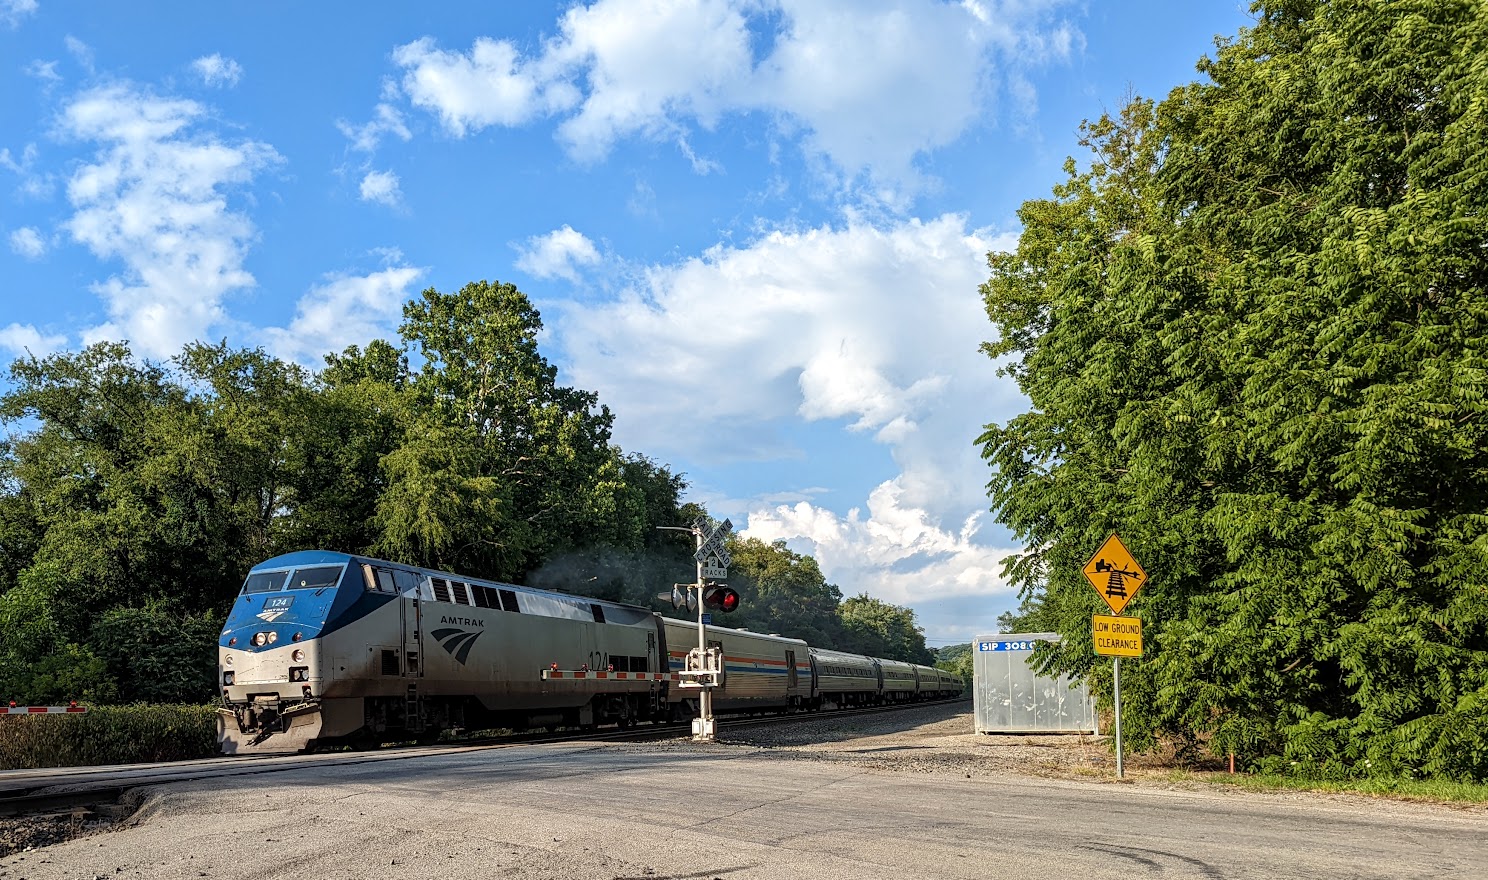 124 is a class GE P42DC and  is pictured in Derry, Pennsylvania, United States.  This was taken along the N/A on the Amtrak. Photo Copyright: Mary T uploaded to Railroad Gallery on 11/11/2022. This photograph of 124 was taken on Thursday, July 21, 2022. All Rights Reserved. 